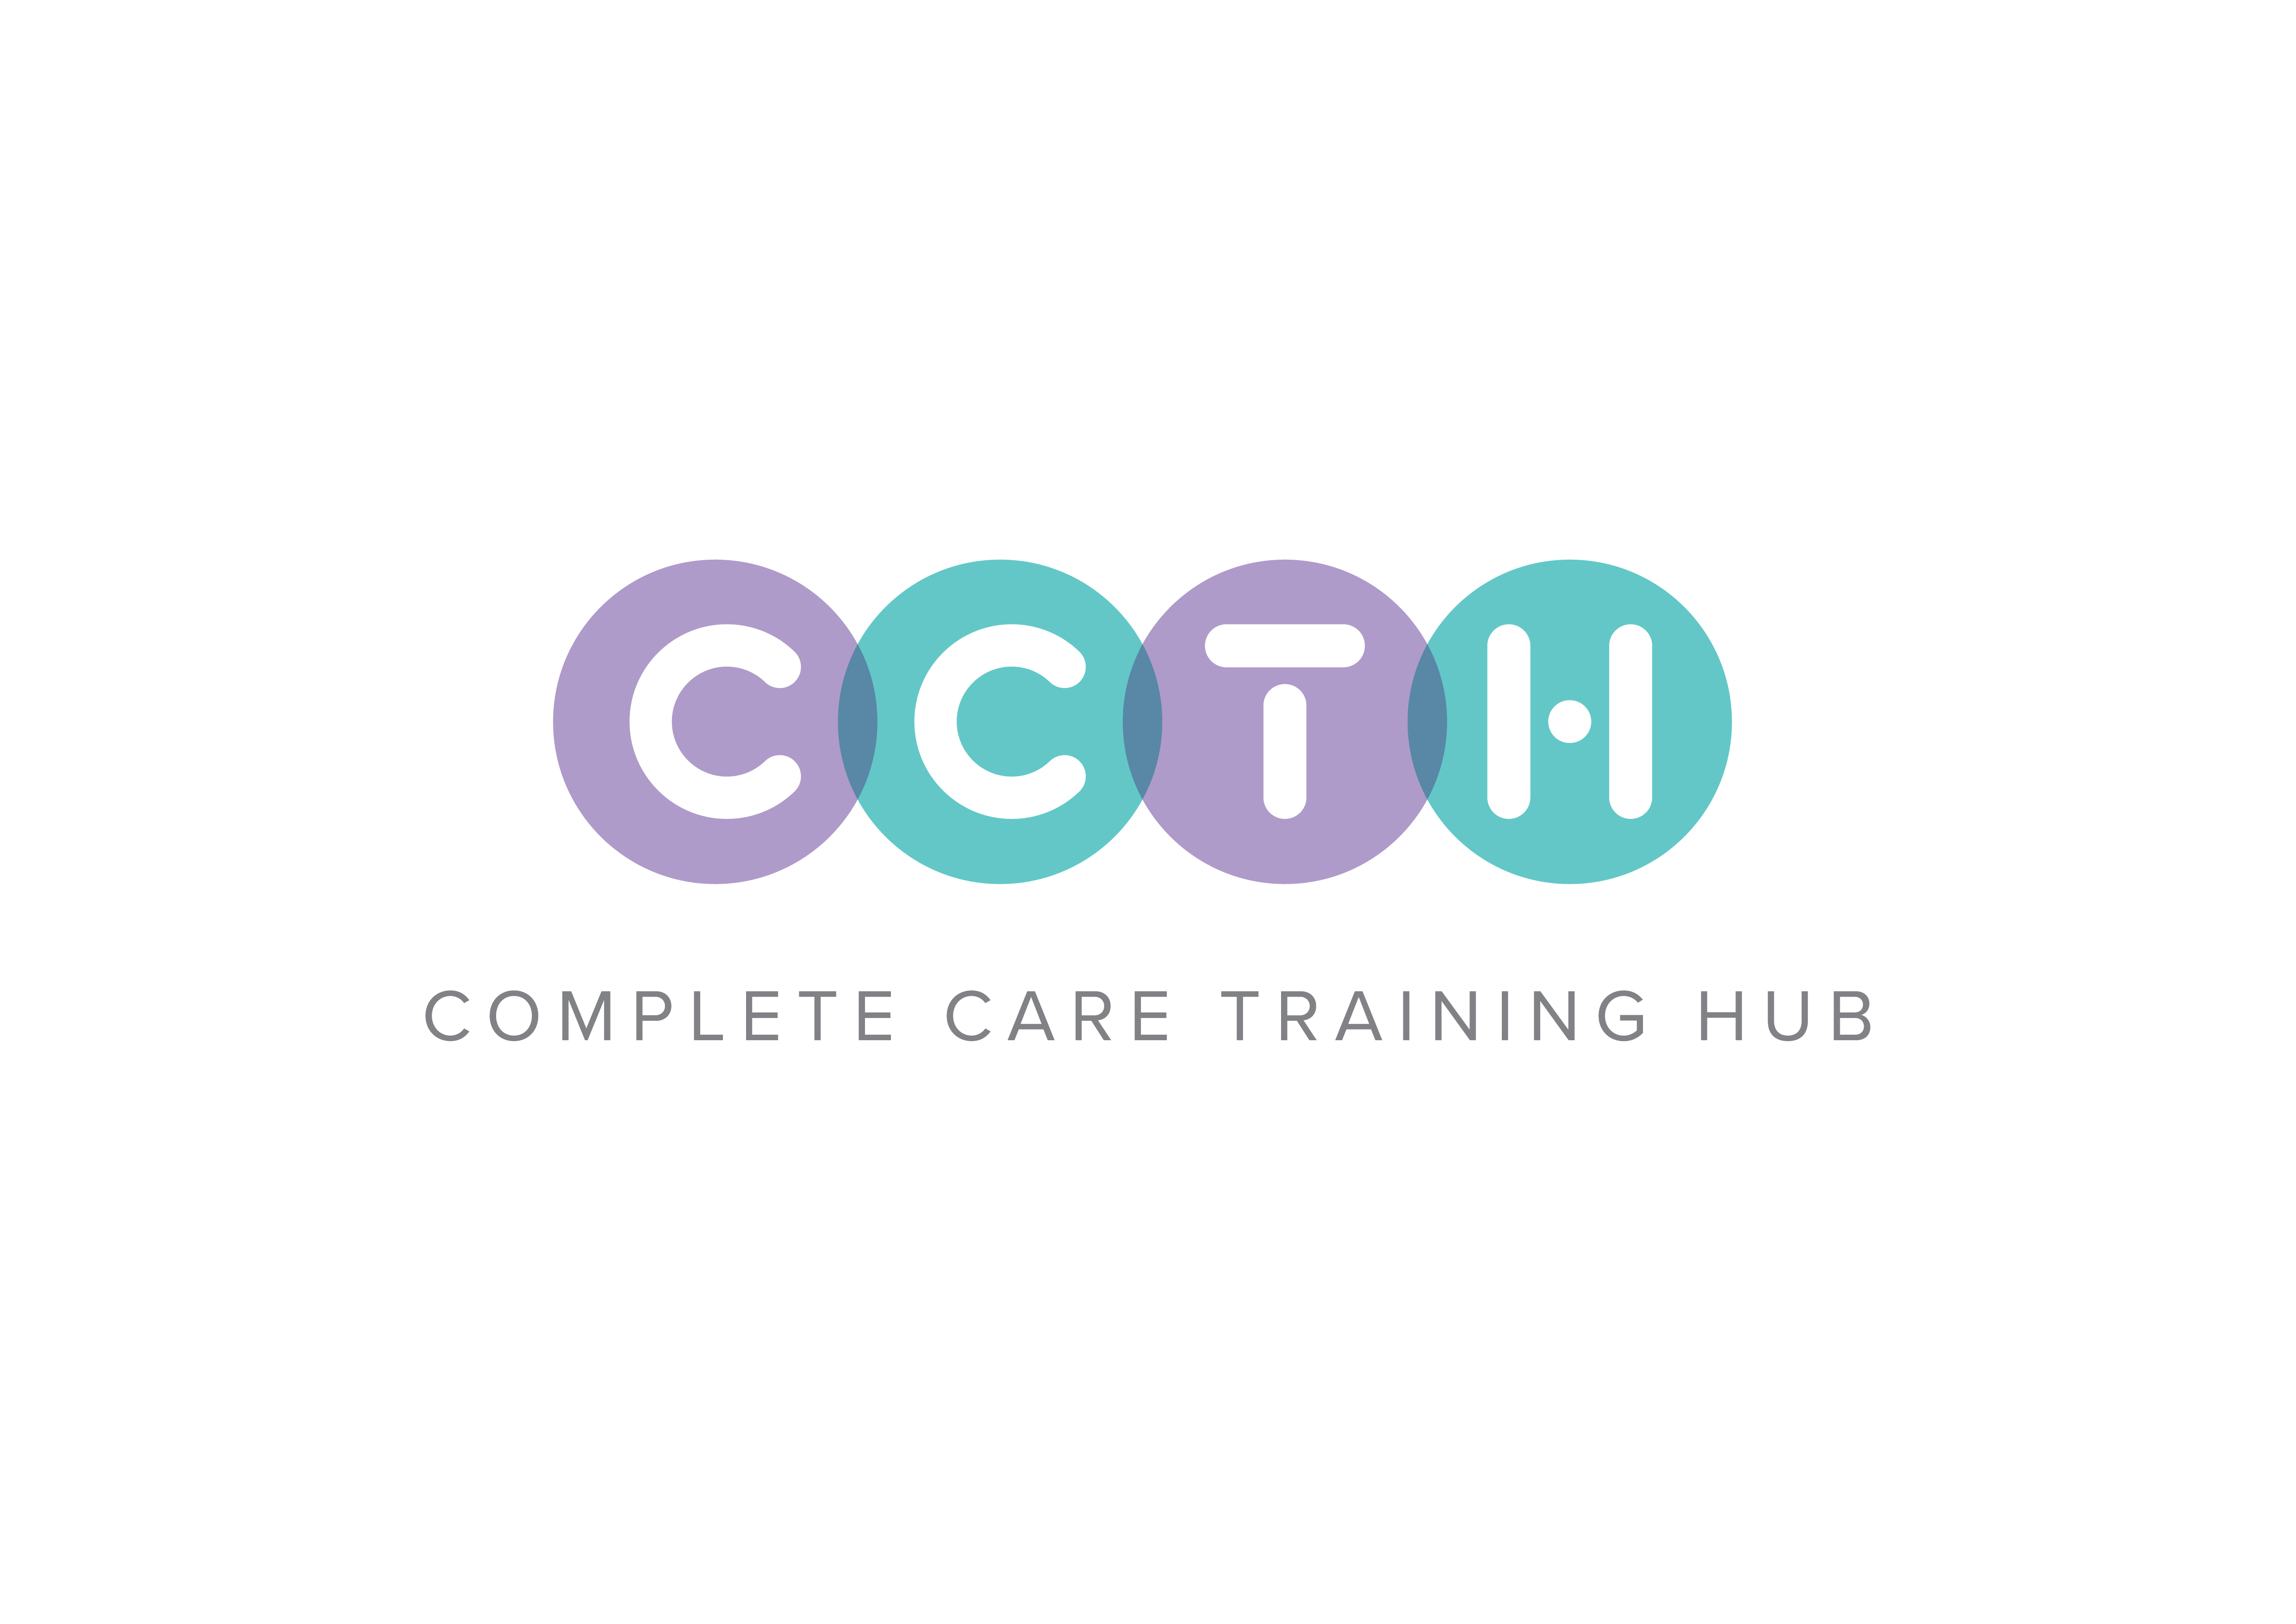 Free one-day online course - Trauma CCTH